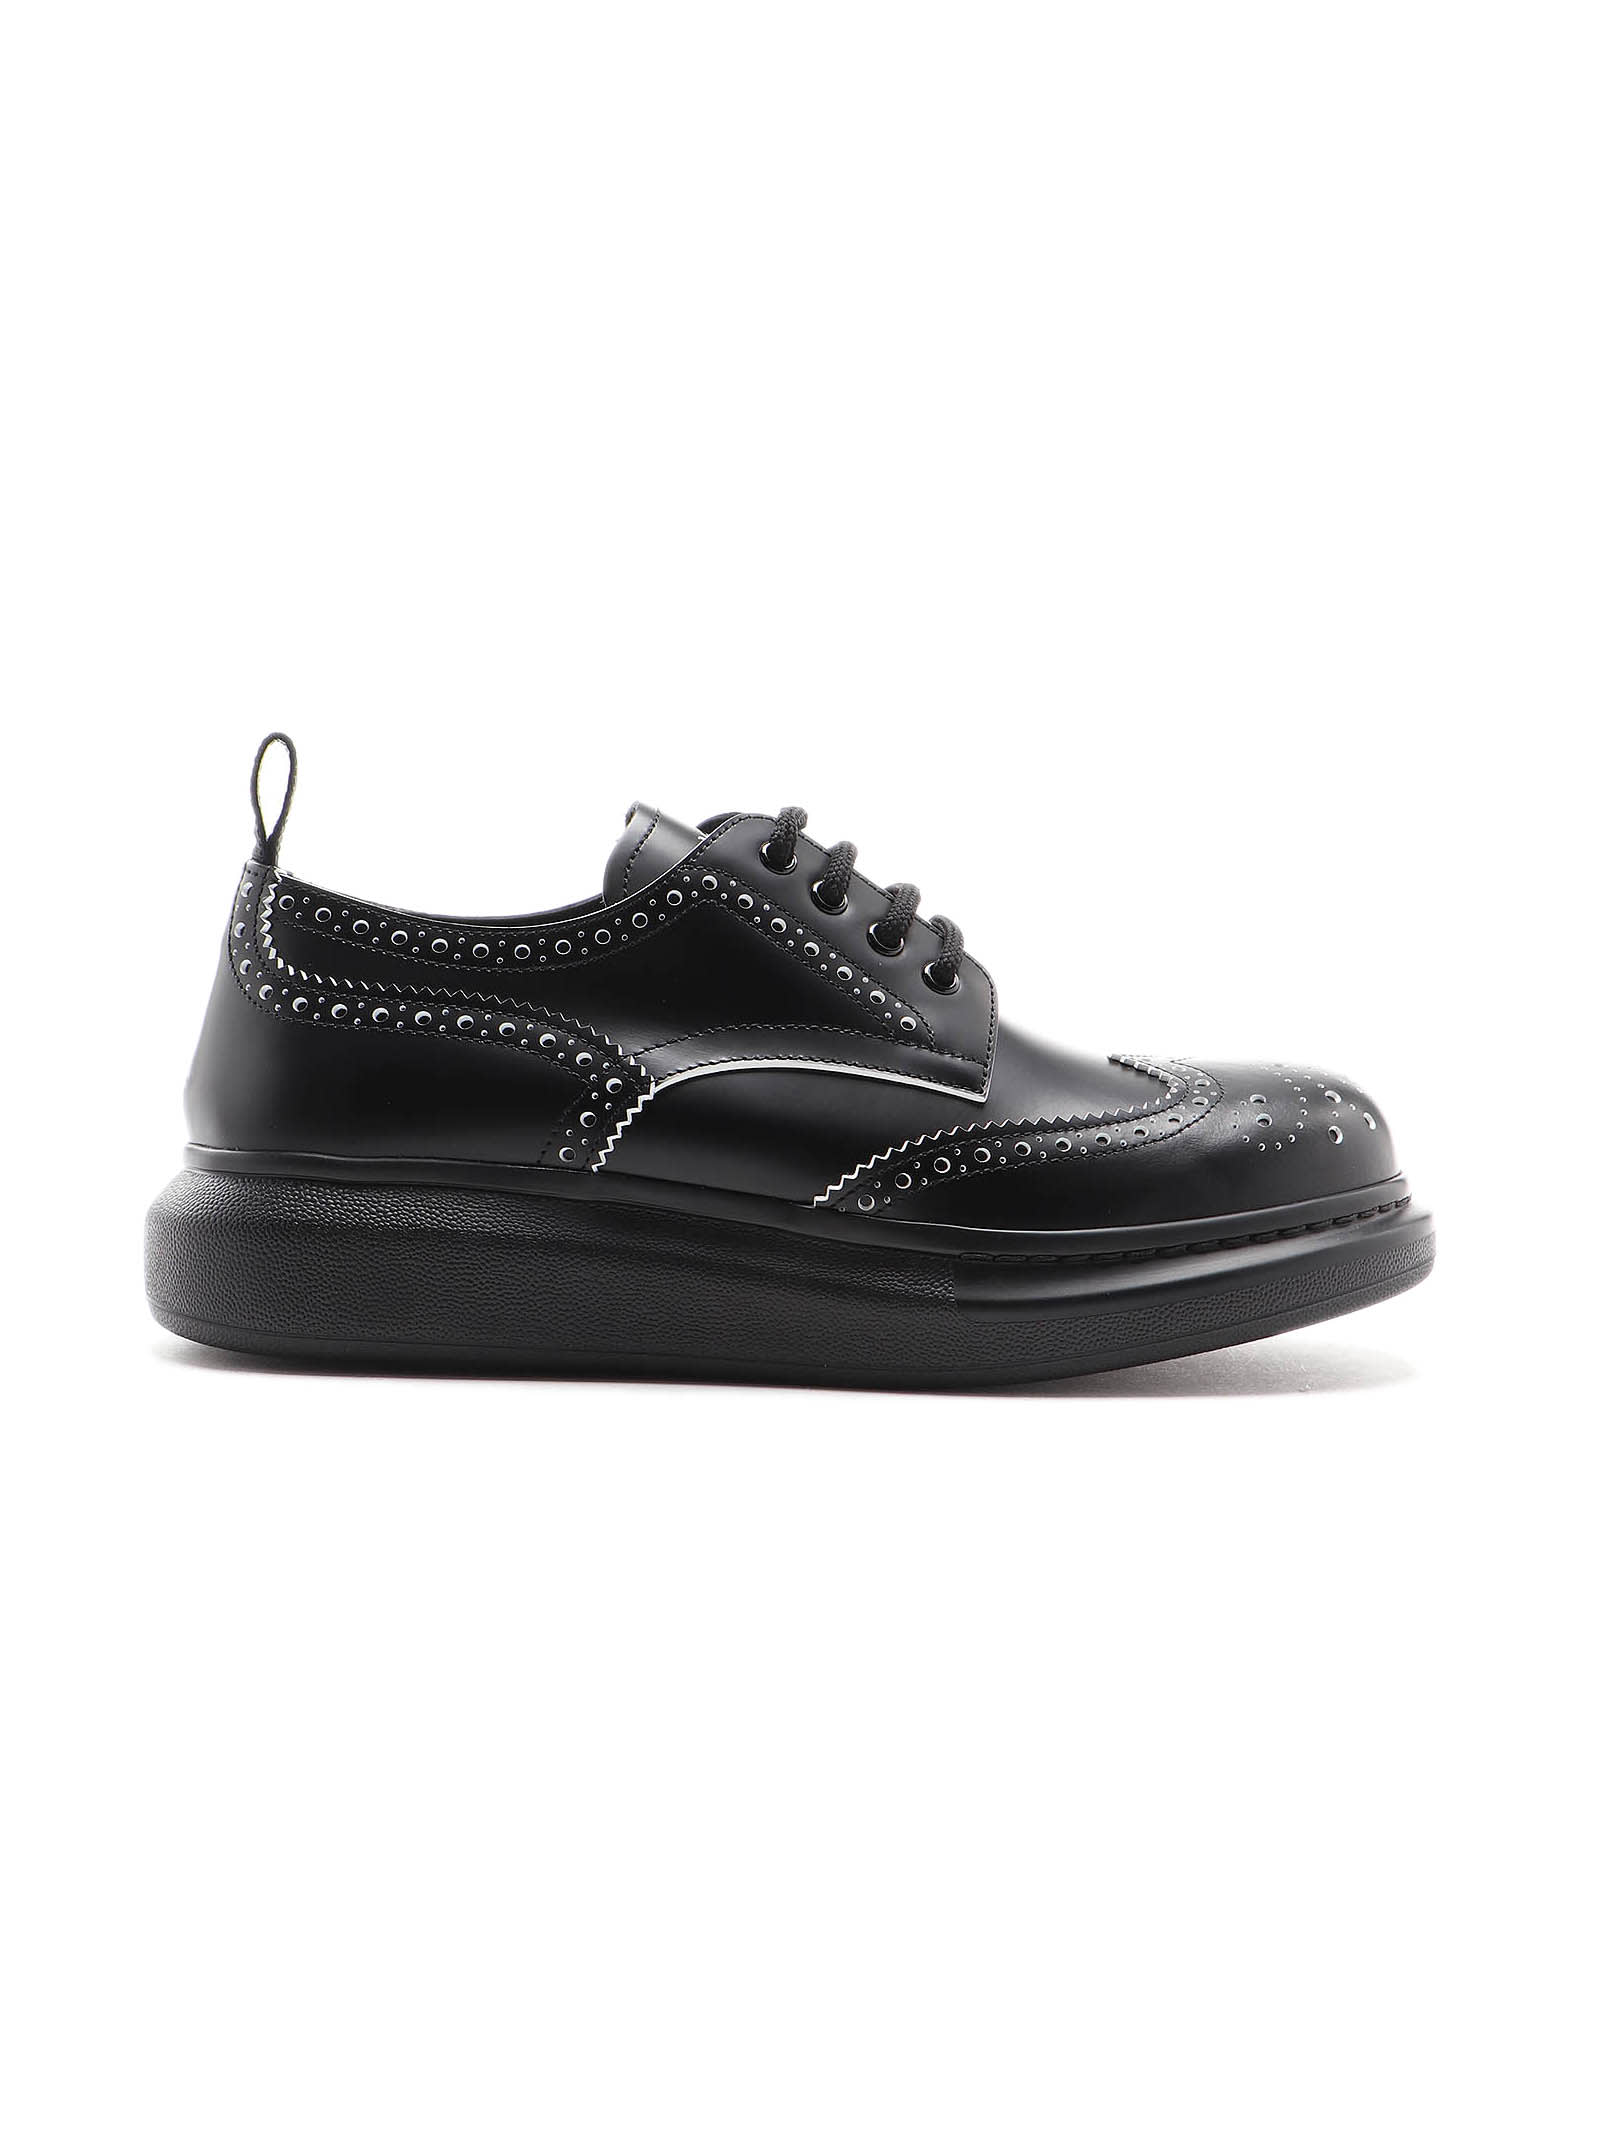 Alexander Mcqueen Lace-up Shoe Oversize In Black/white | ModeSens